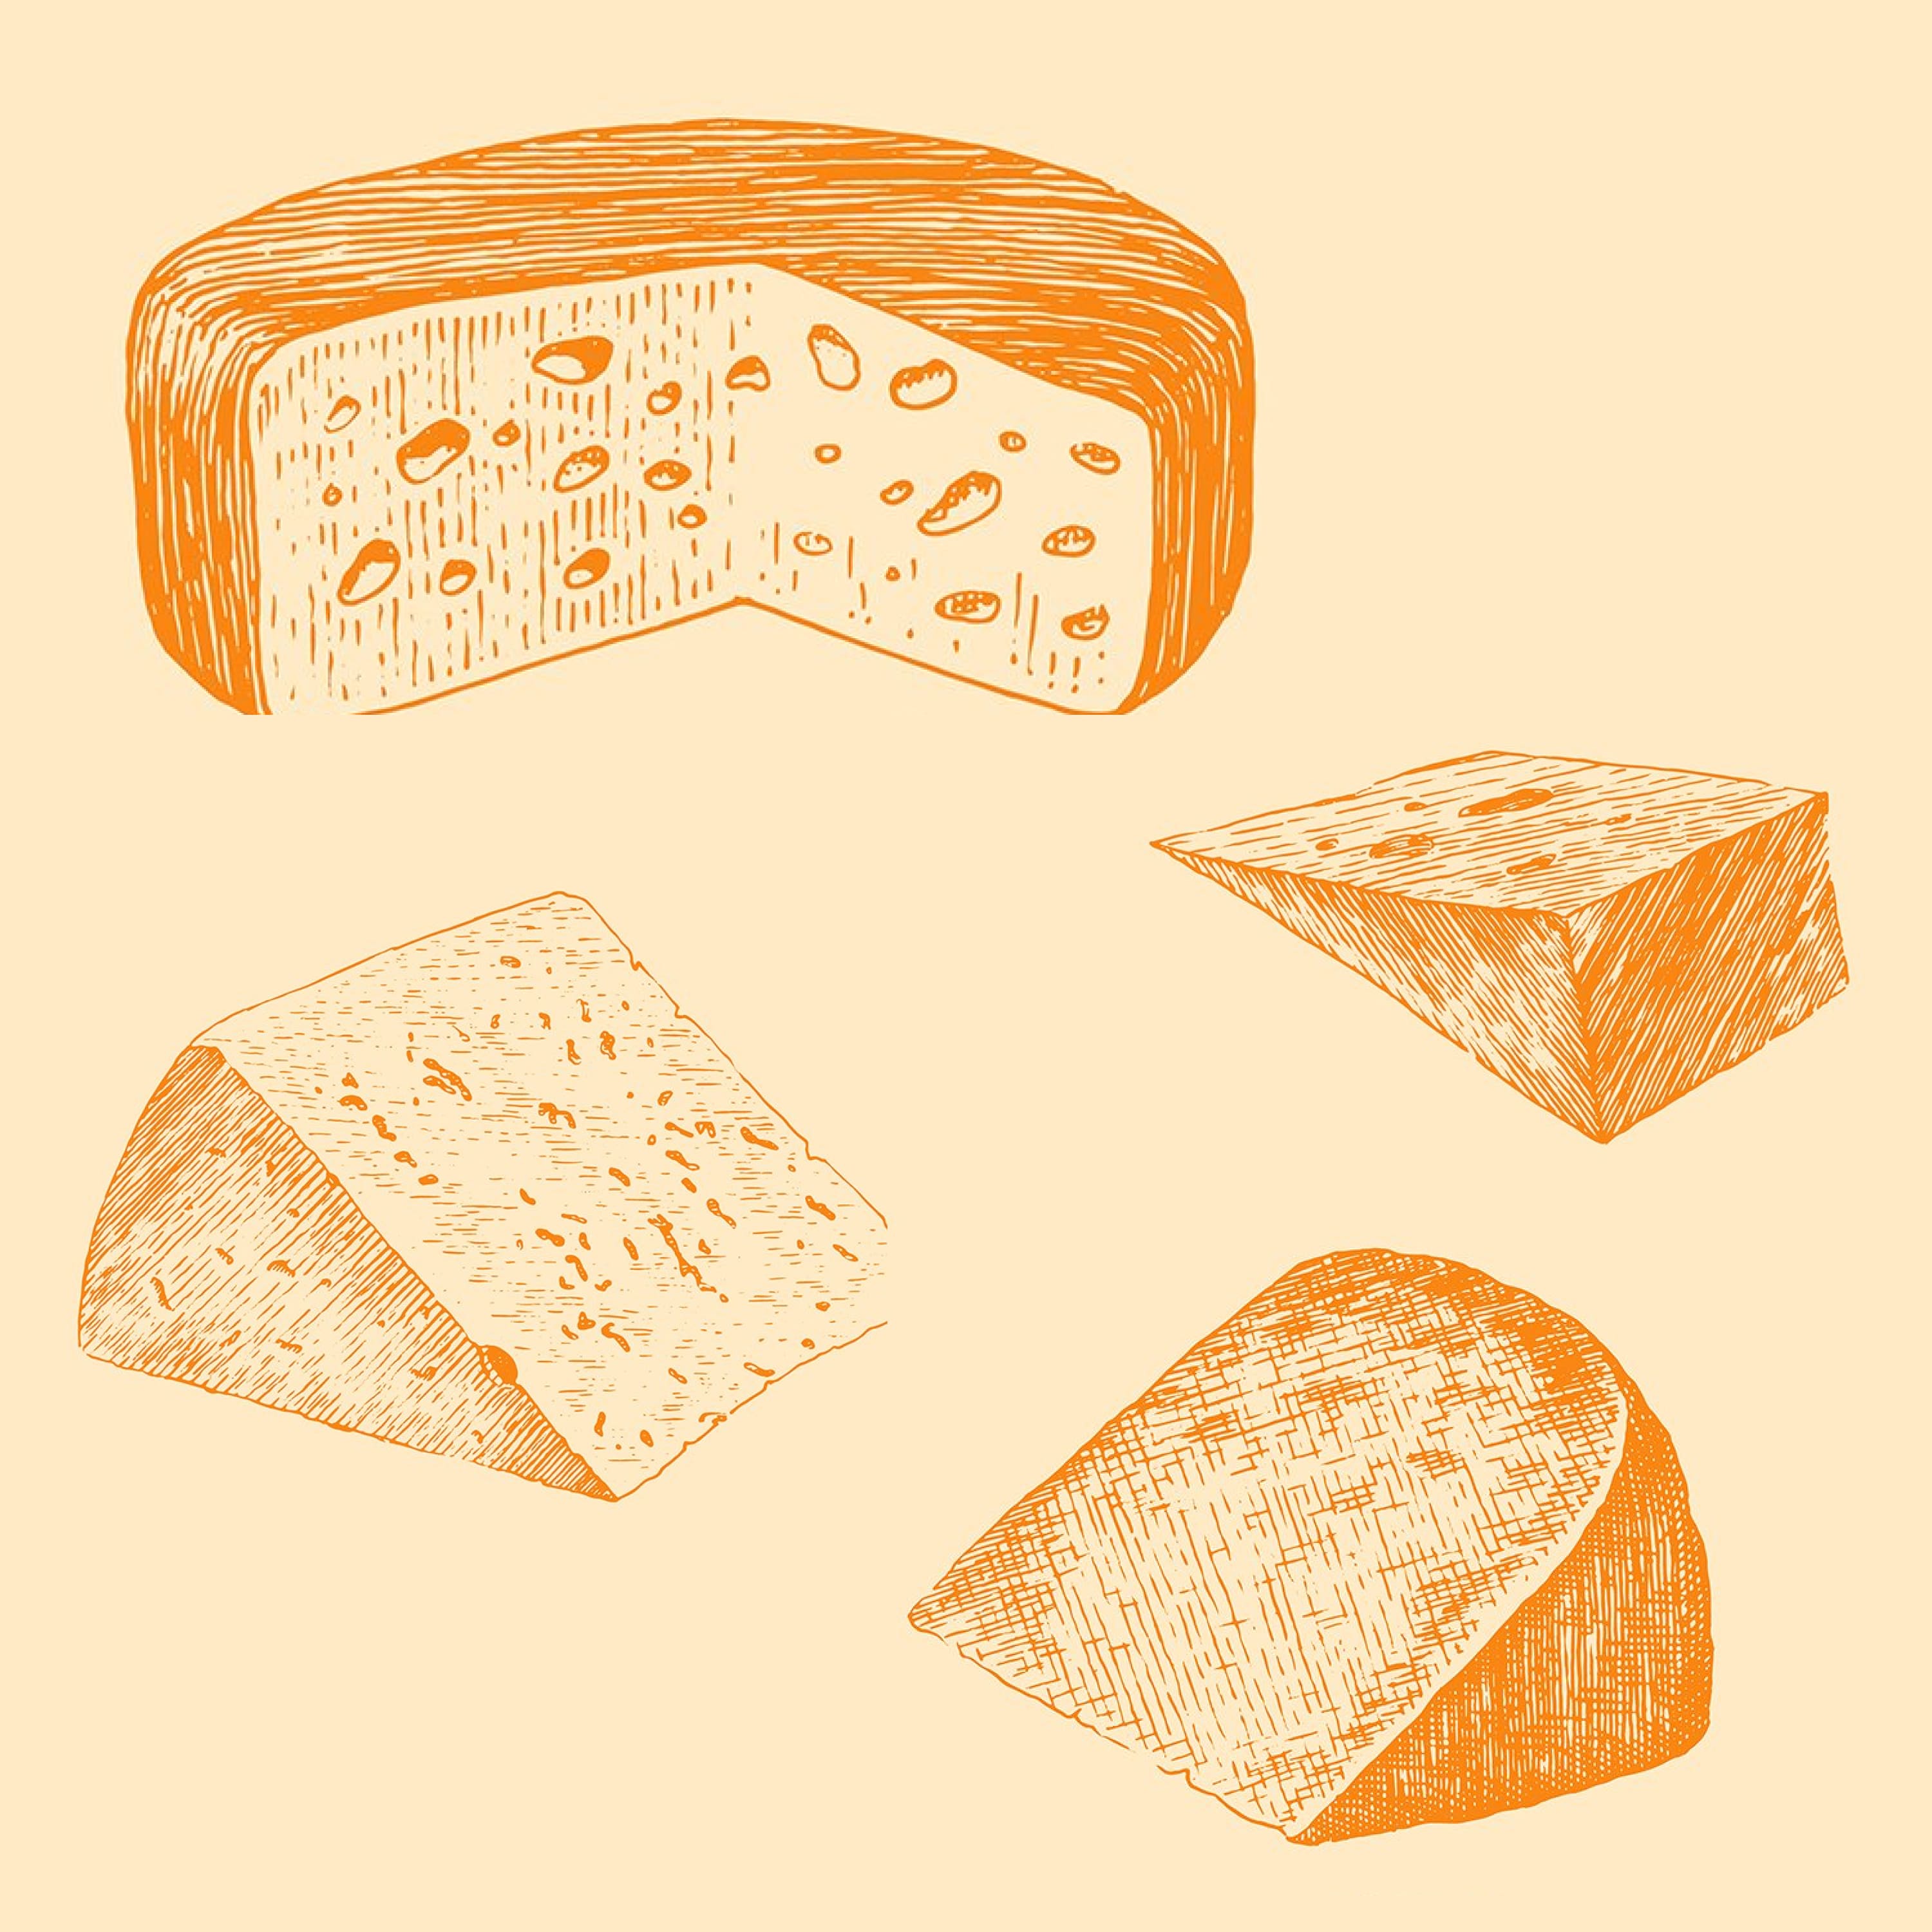 Set of colorful images of hard cheese.